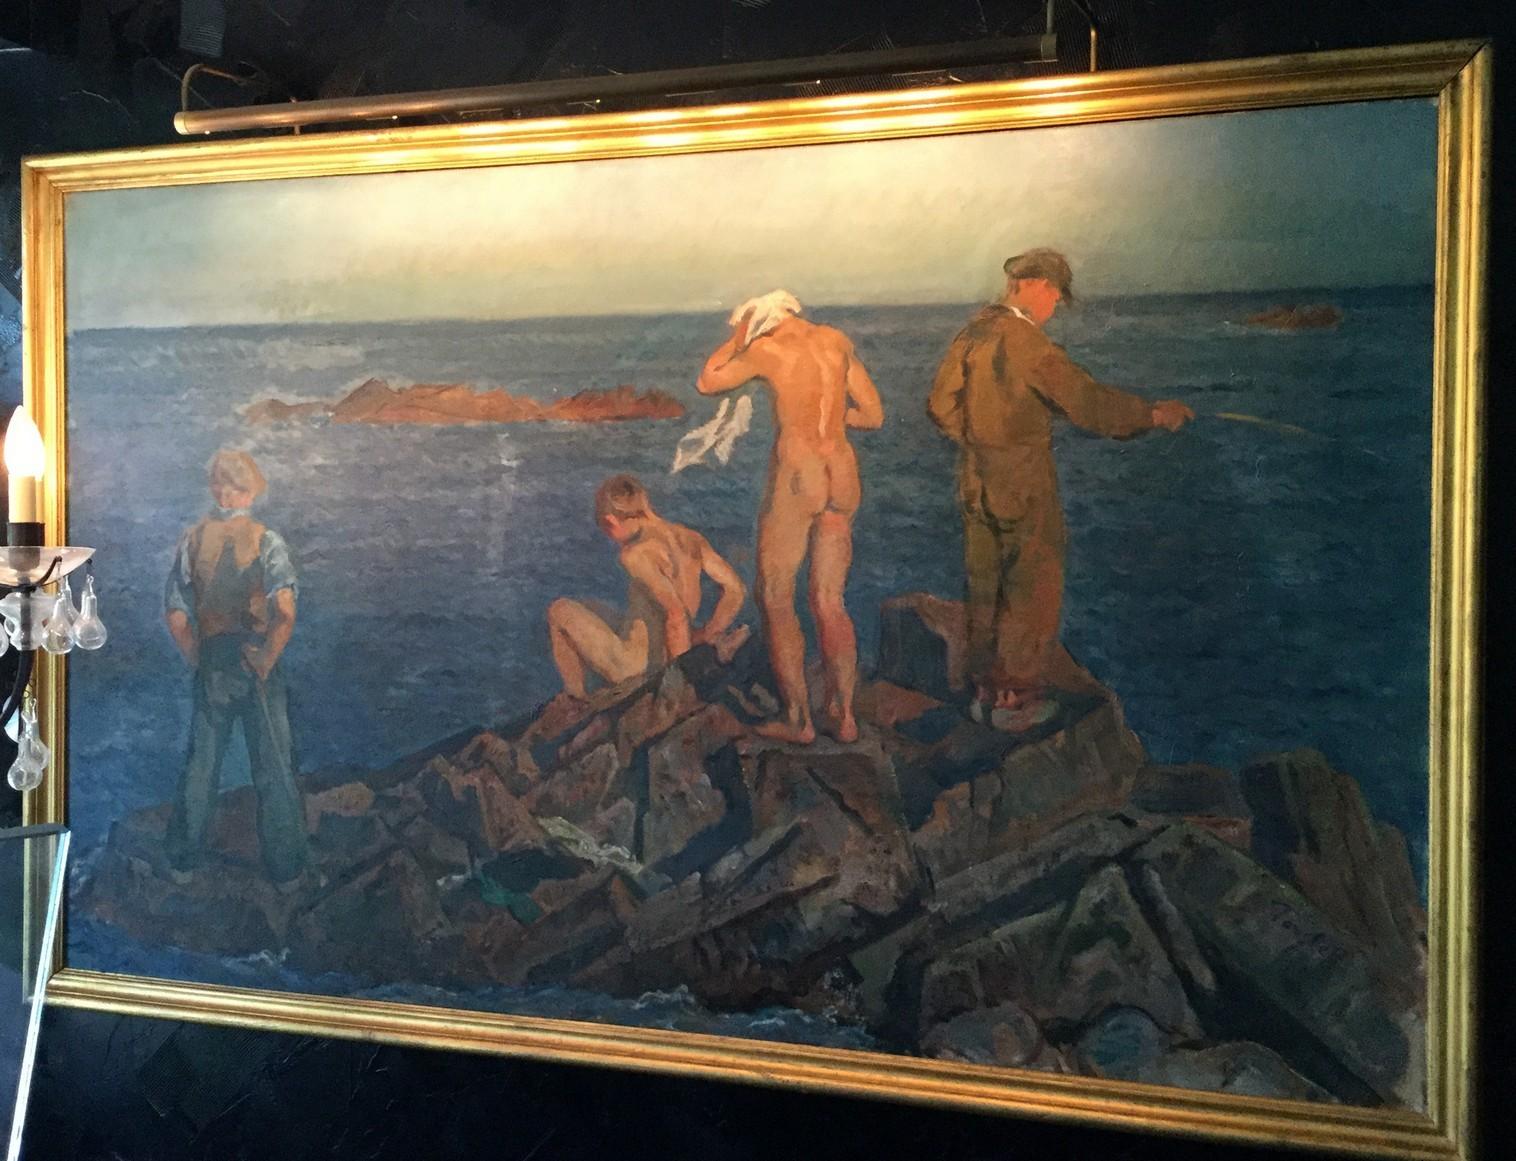 For your consideration is a vivid, framed oil painting on canvas, depicting nude men on rocks by the sea, hand-signed by August Torsleff. In excellent condition. August Torsleff was a Danish painter who was born in 1884. Dimensions: 44